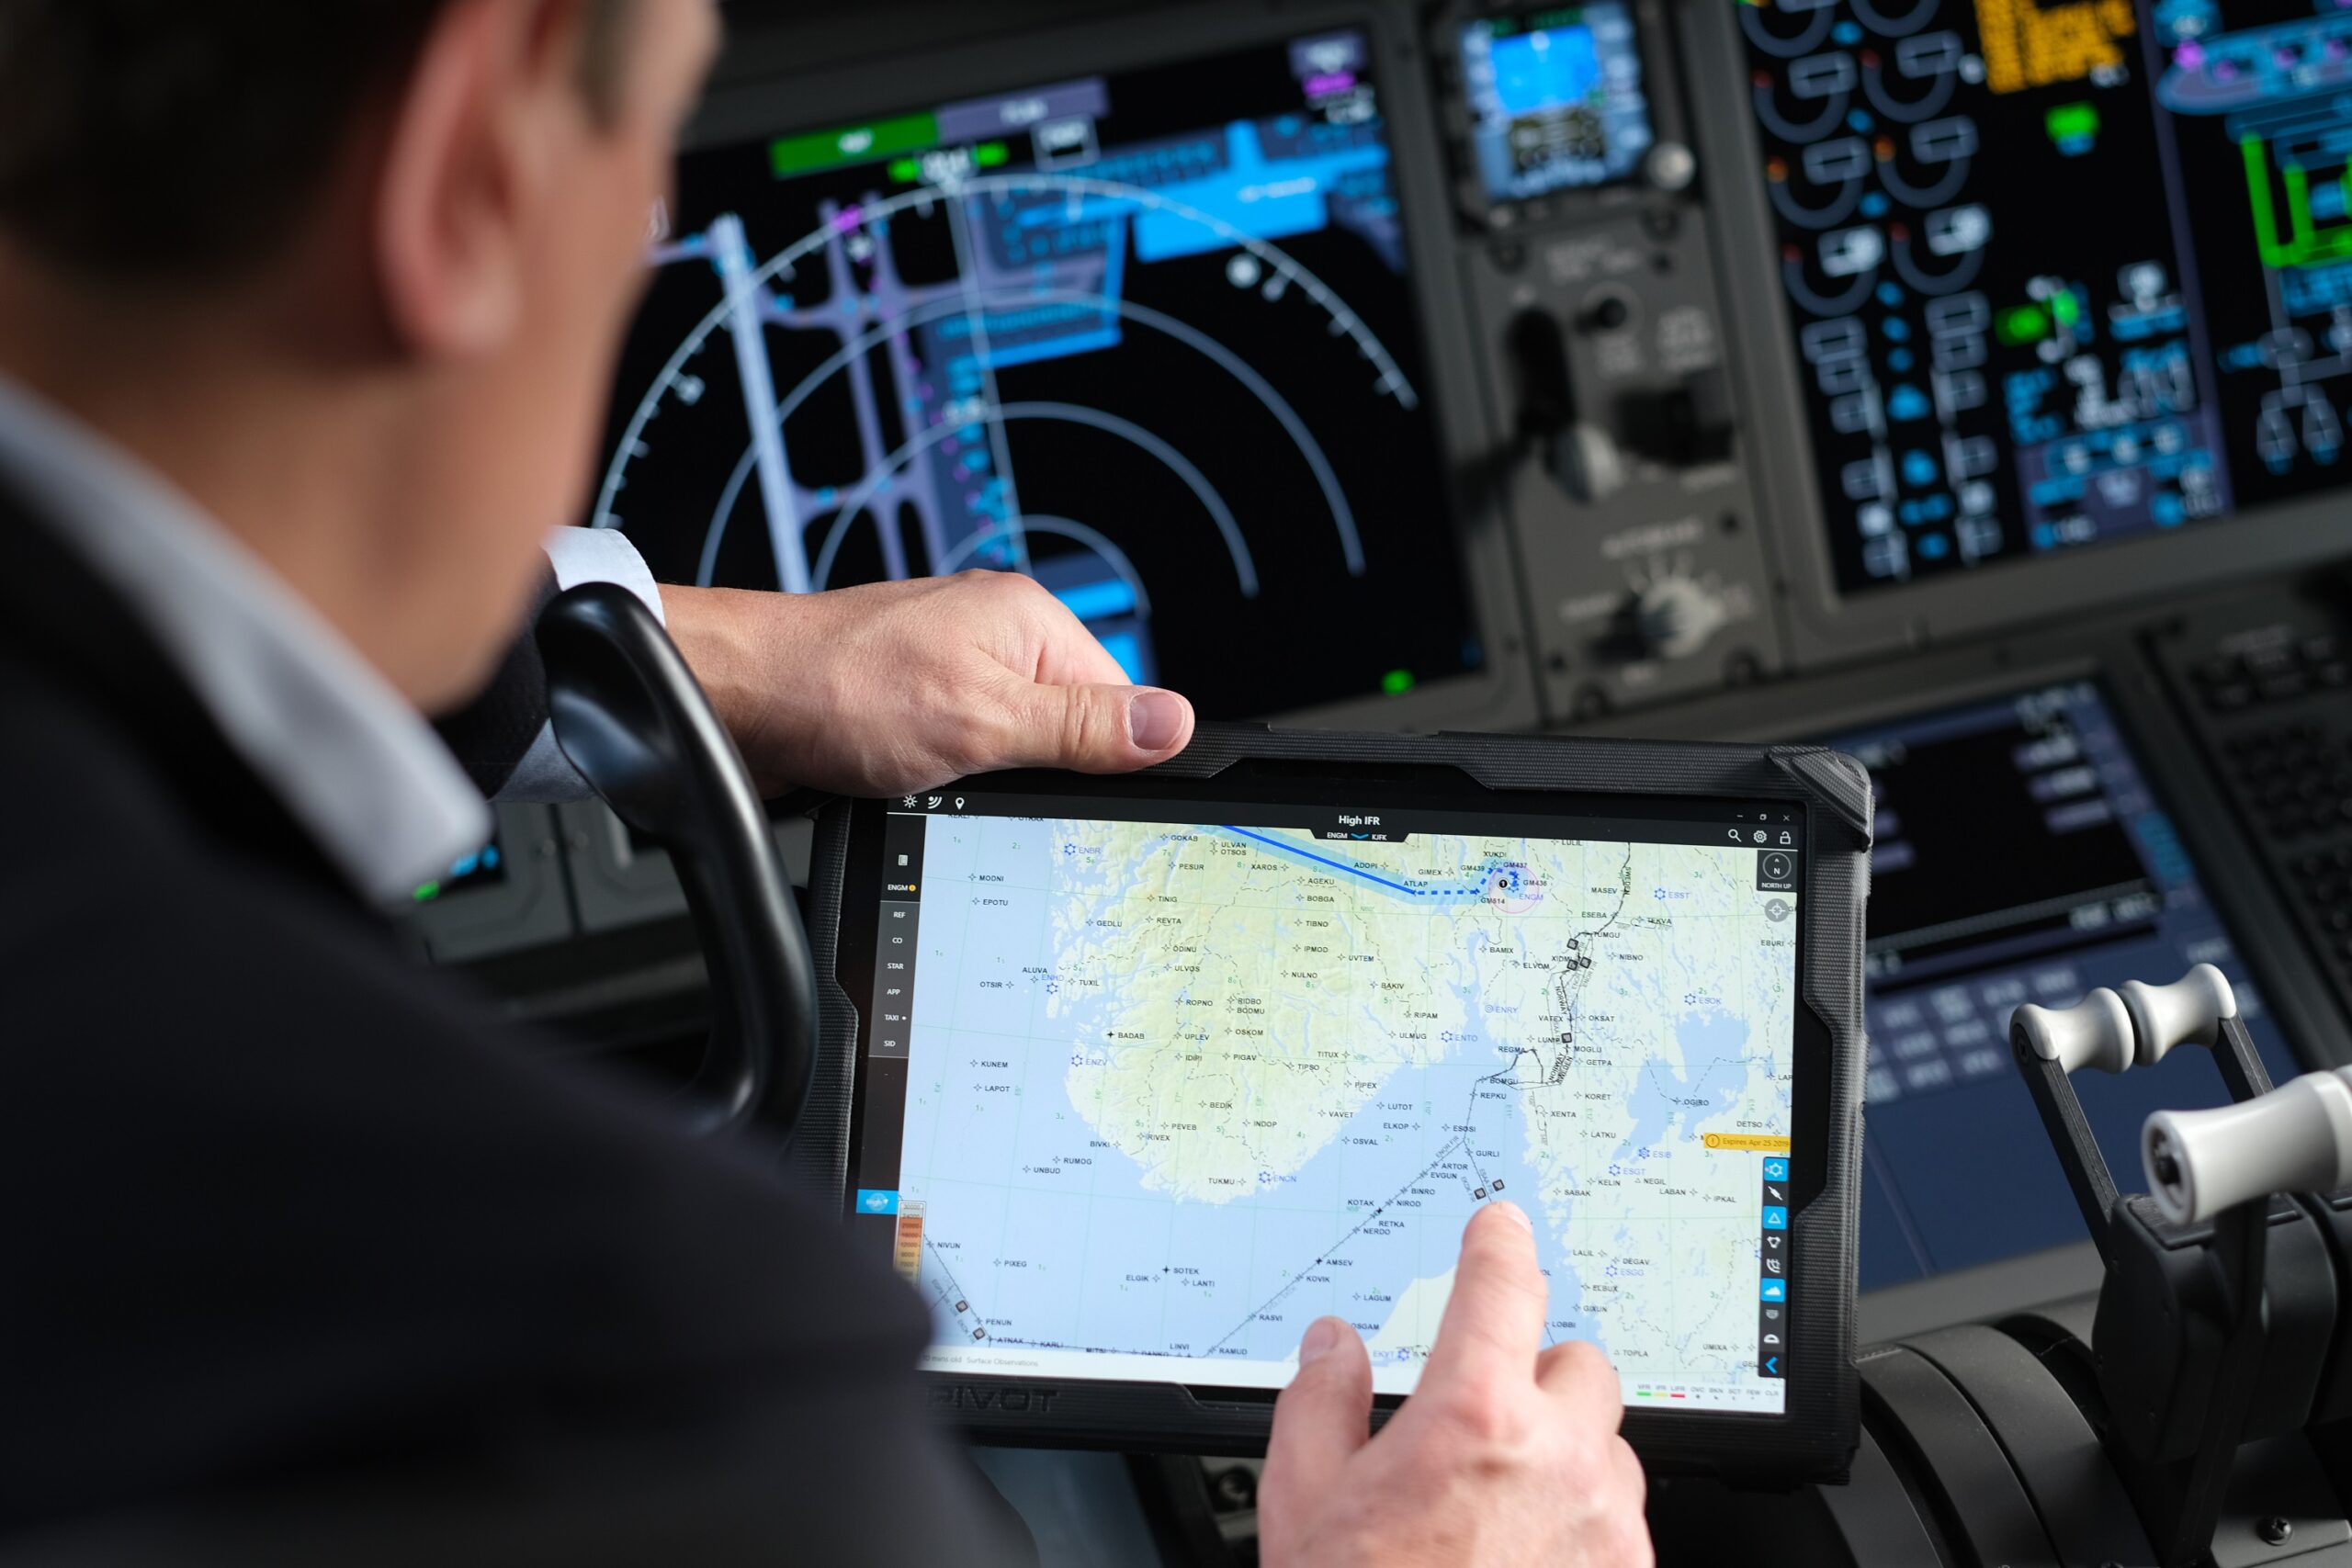 An airline pilot sitting in the cockpit looks at a Surface screen that is displaying a map.